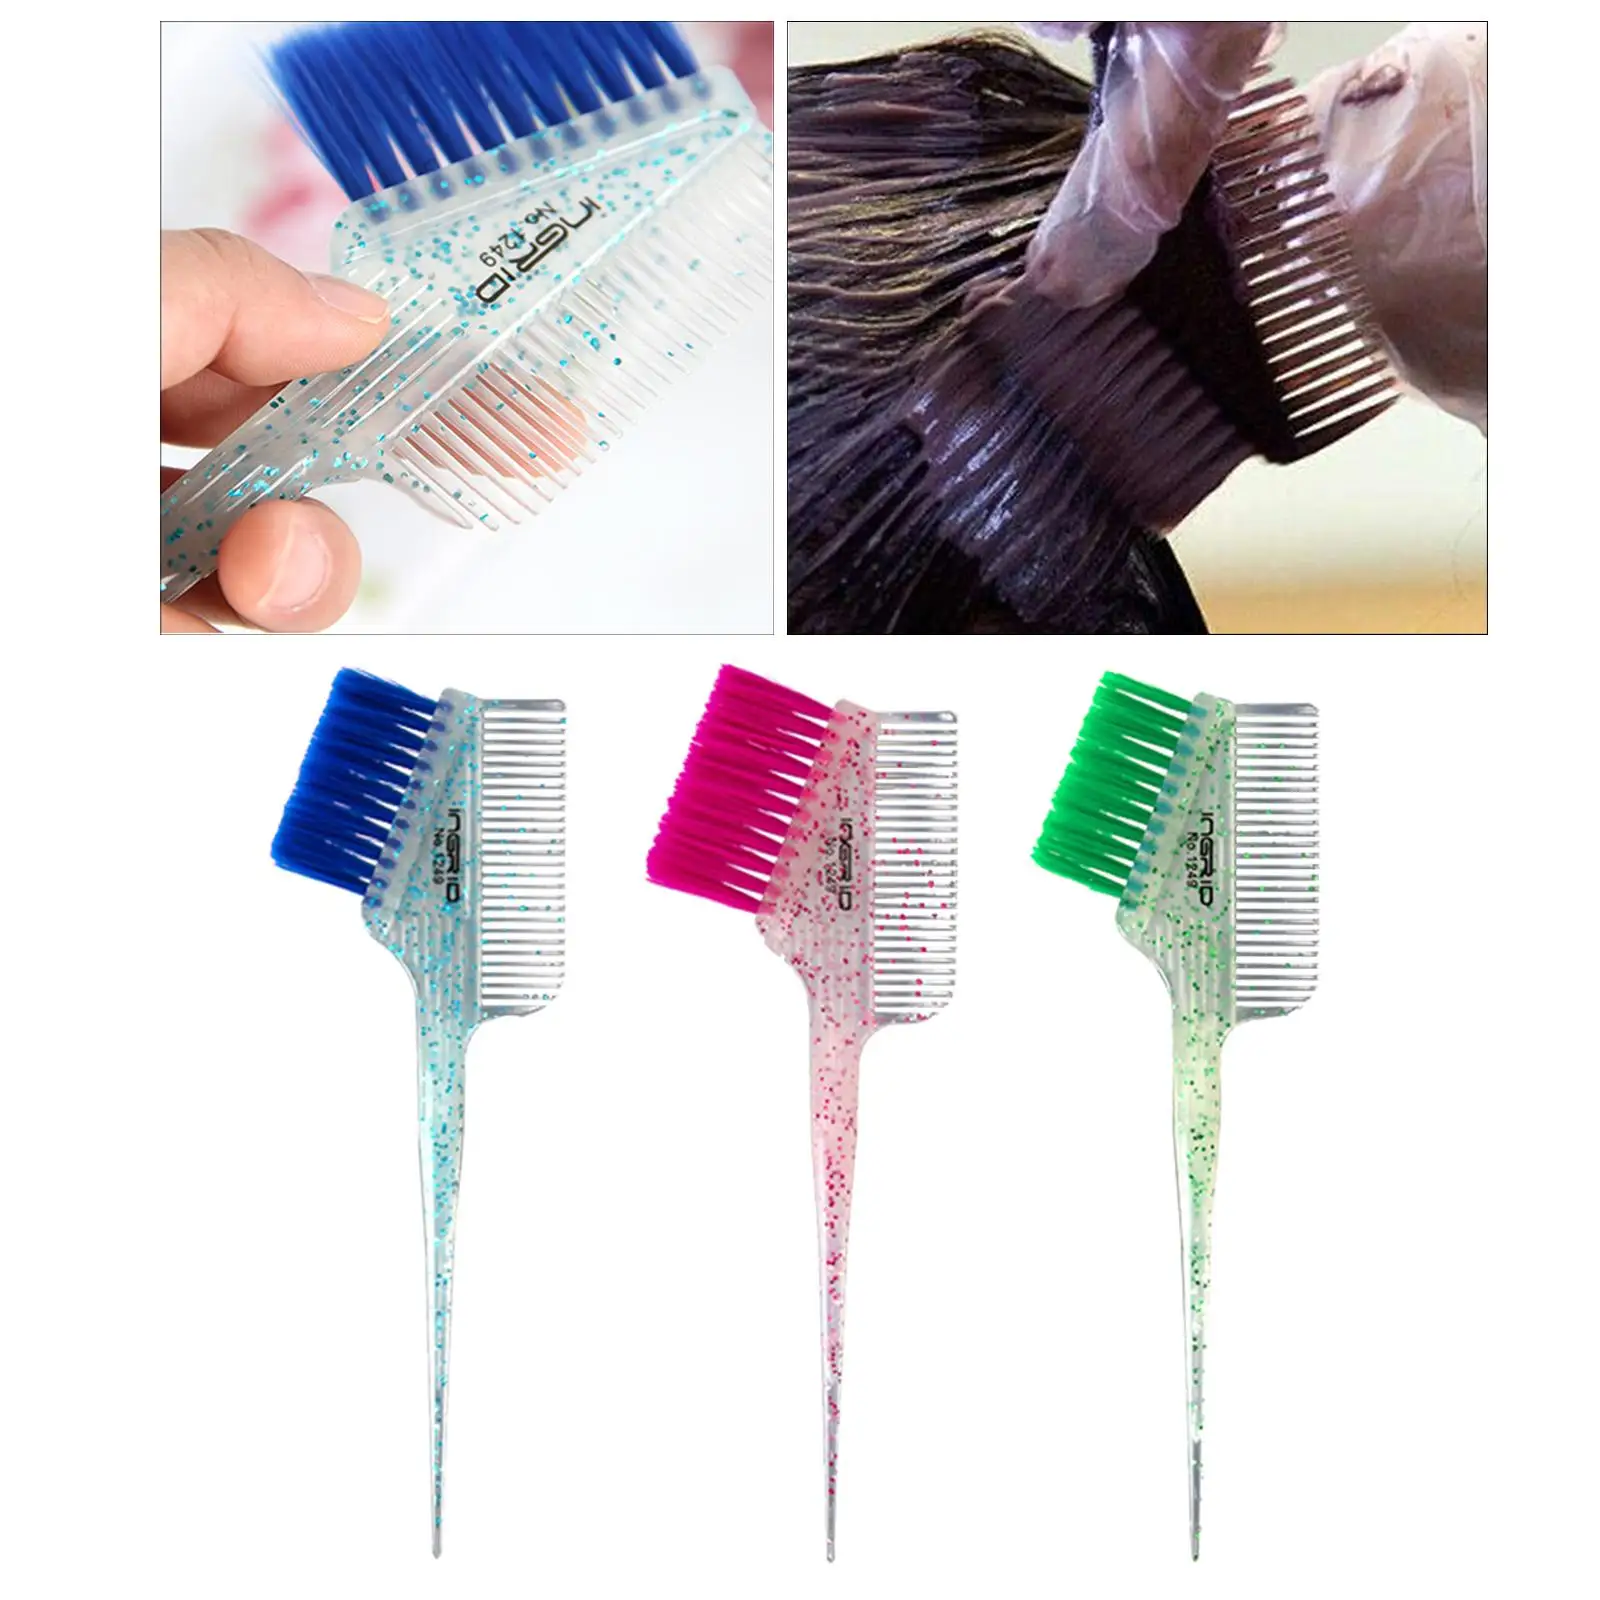 Pearl Hair Coloring Brush Comb Styling Tools Professional Dyeing with Long Handle for Salon DIY Shop Home Barber